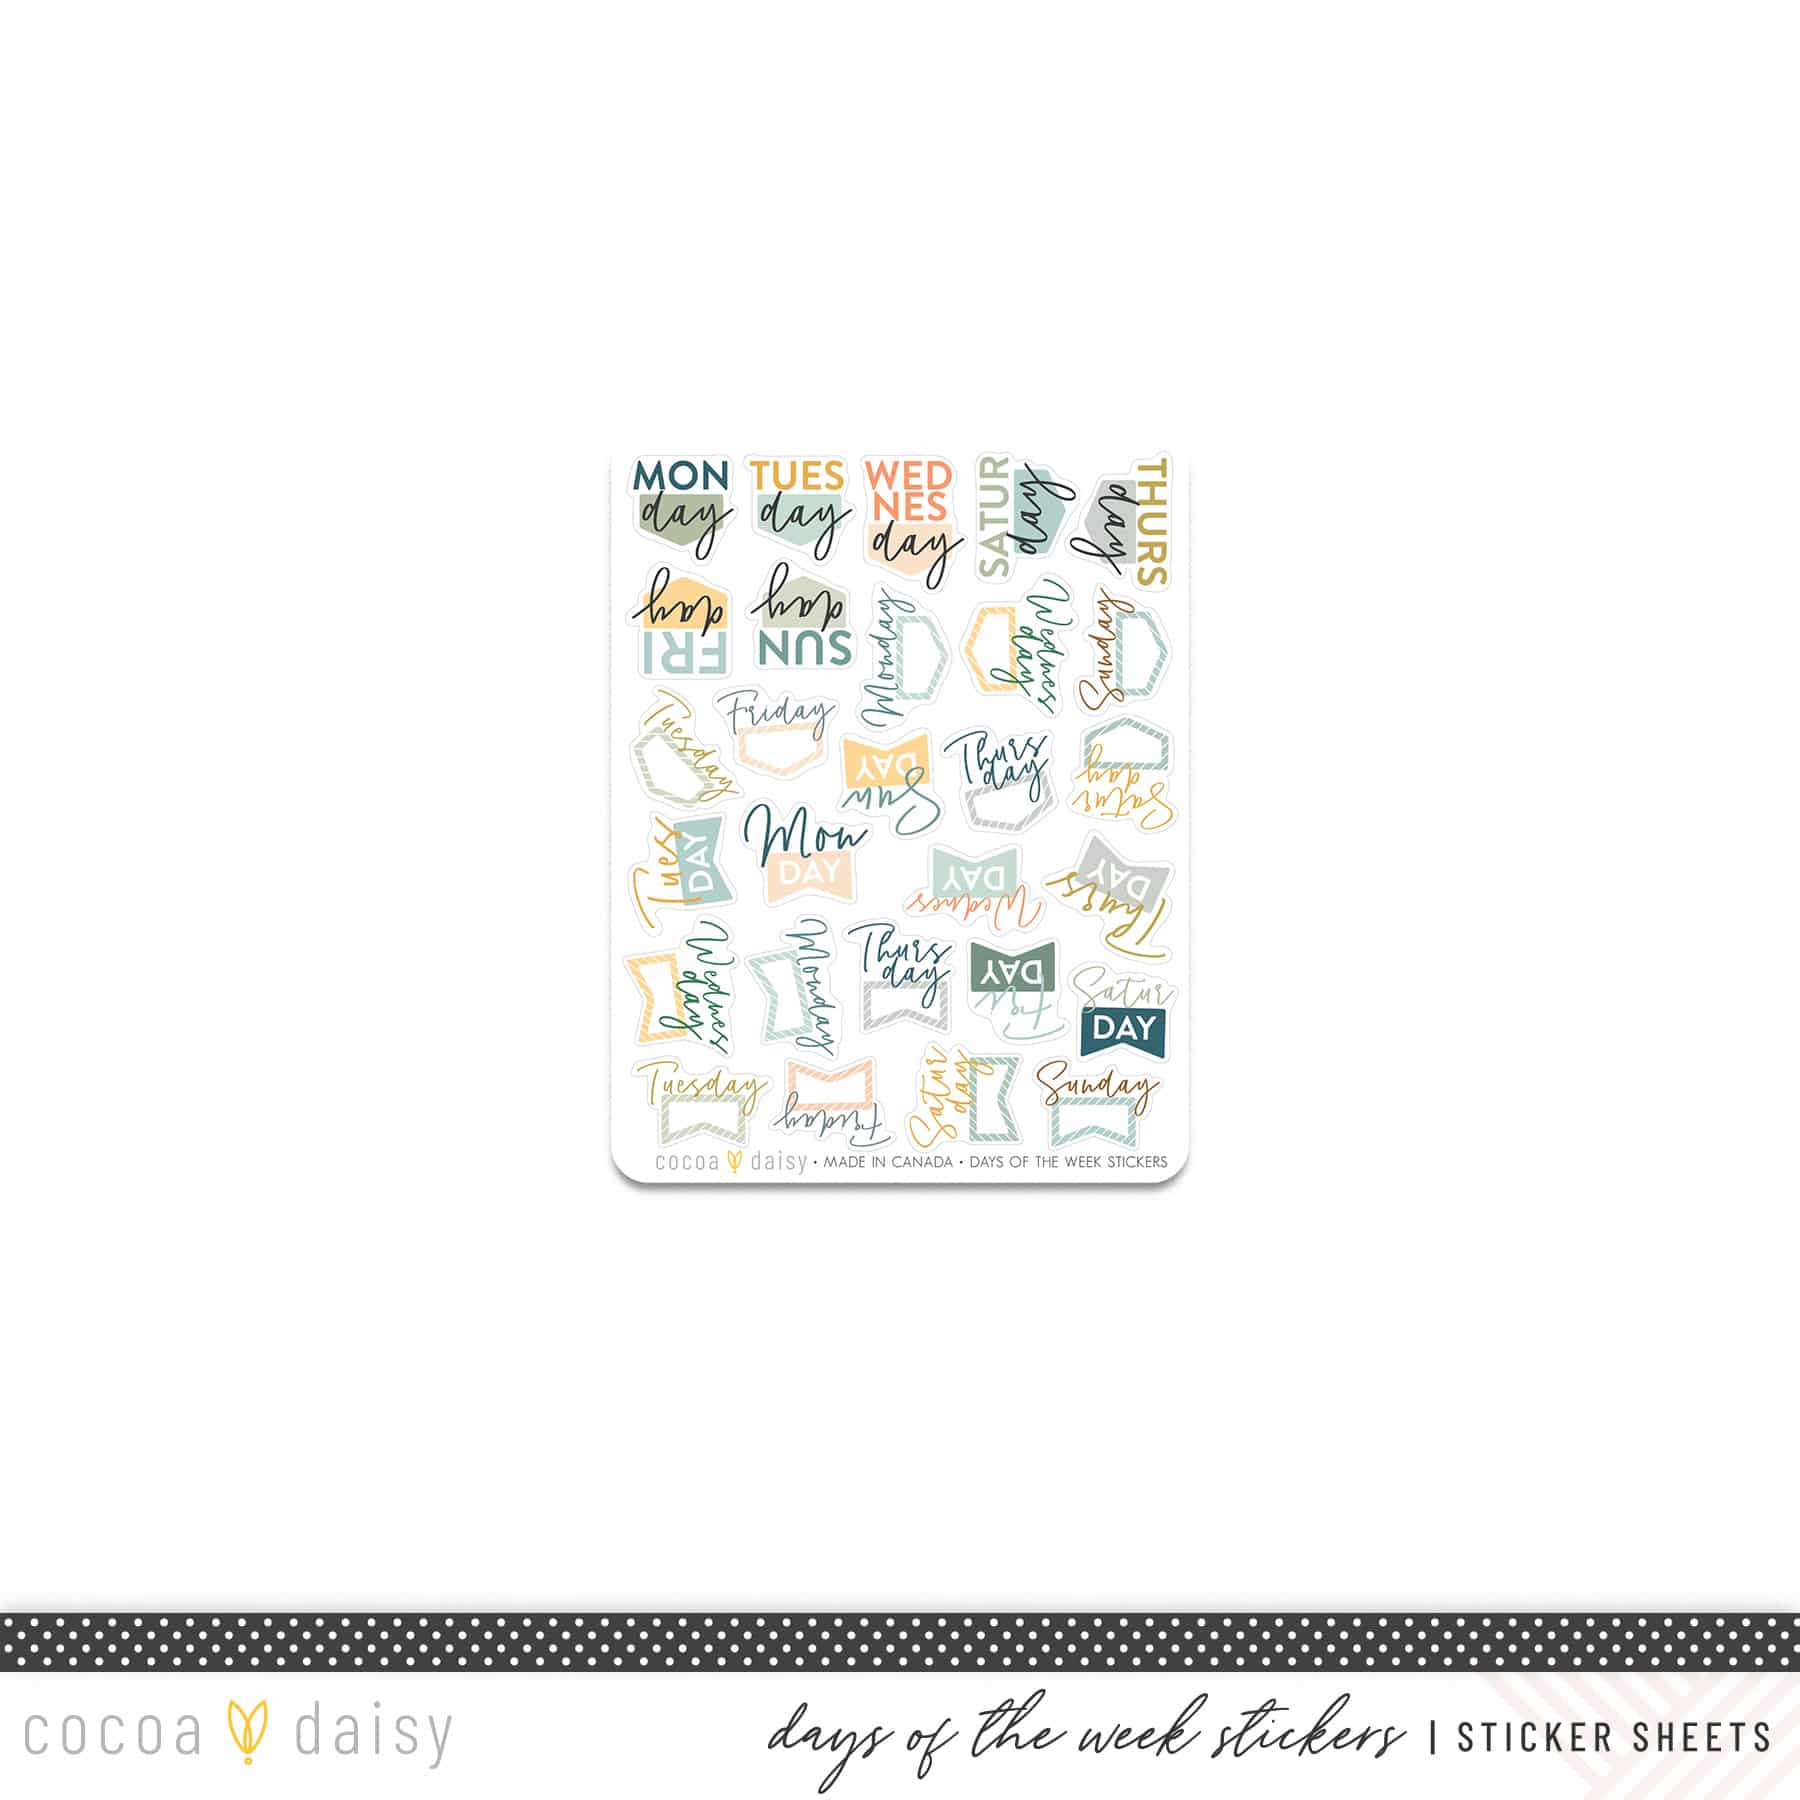 Cocoa Daisy Exclusive "Days of the Week" Sticker Sheet